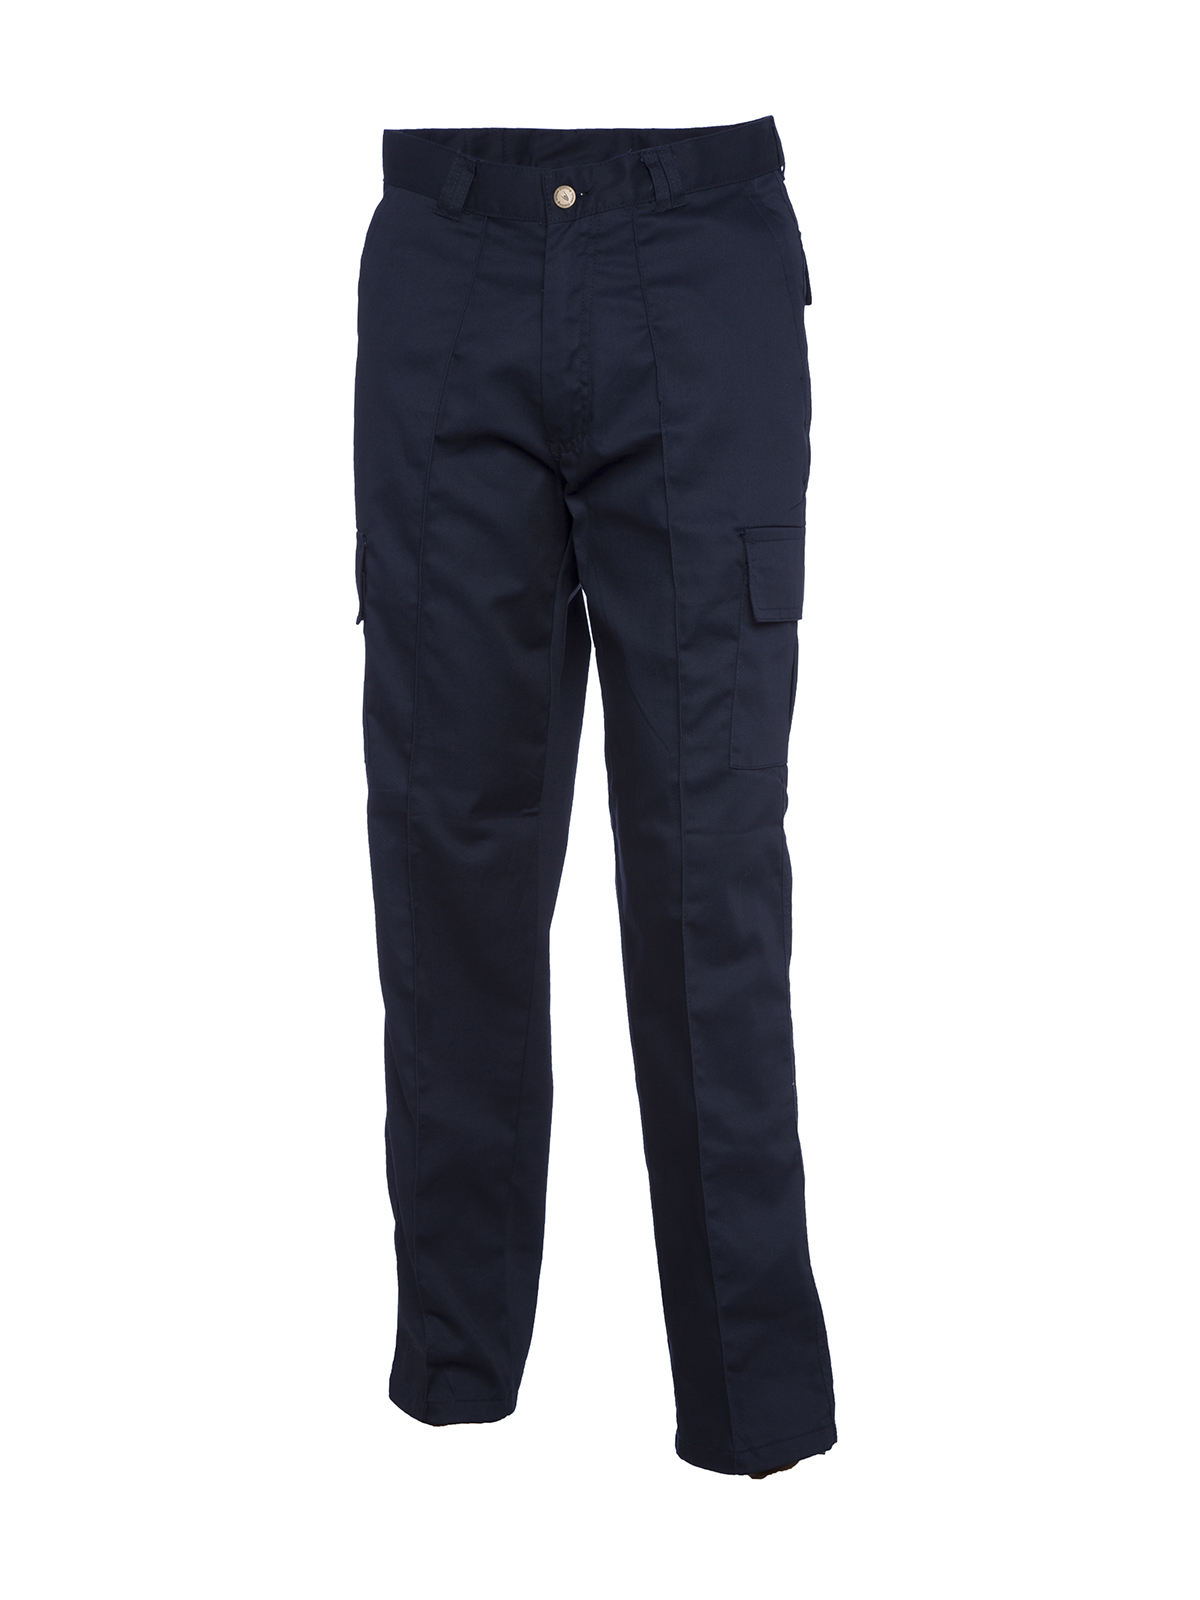 Cargo Trousers, Navy Blue - 42R